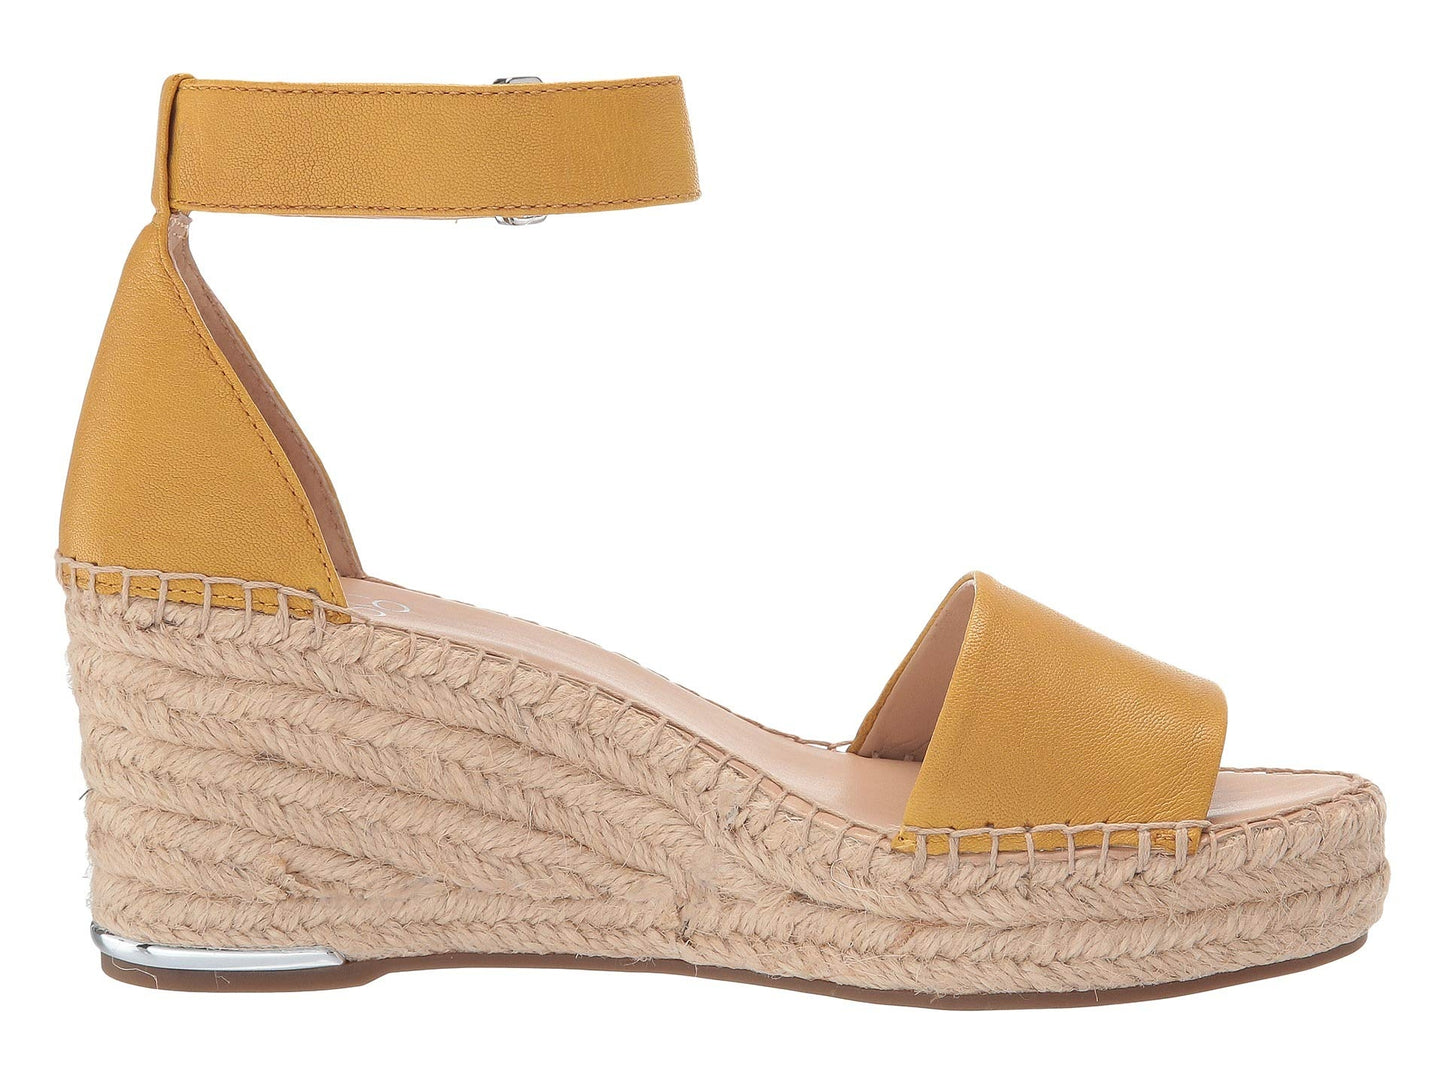 Clemens Summer Yellow Leather Franco Sarto Wedge Sandals